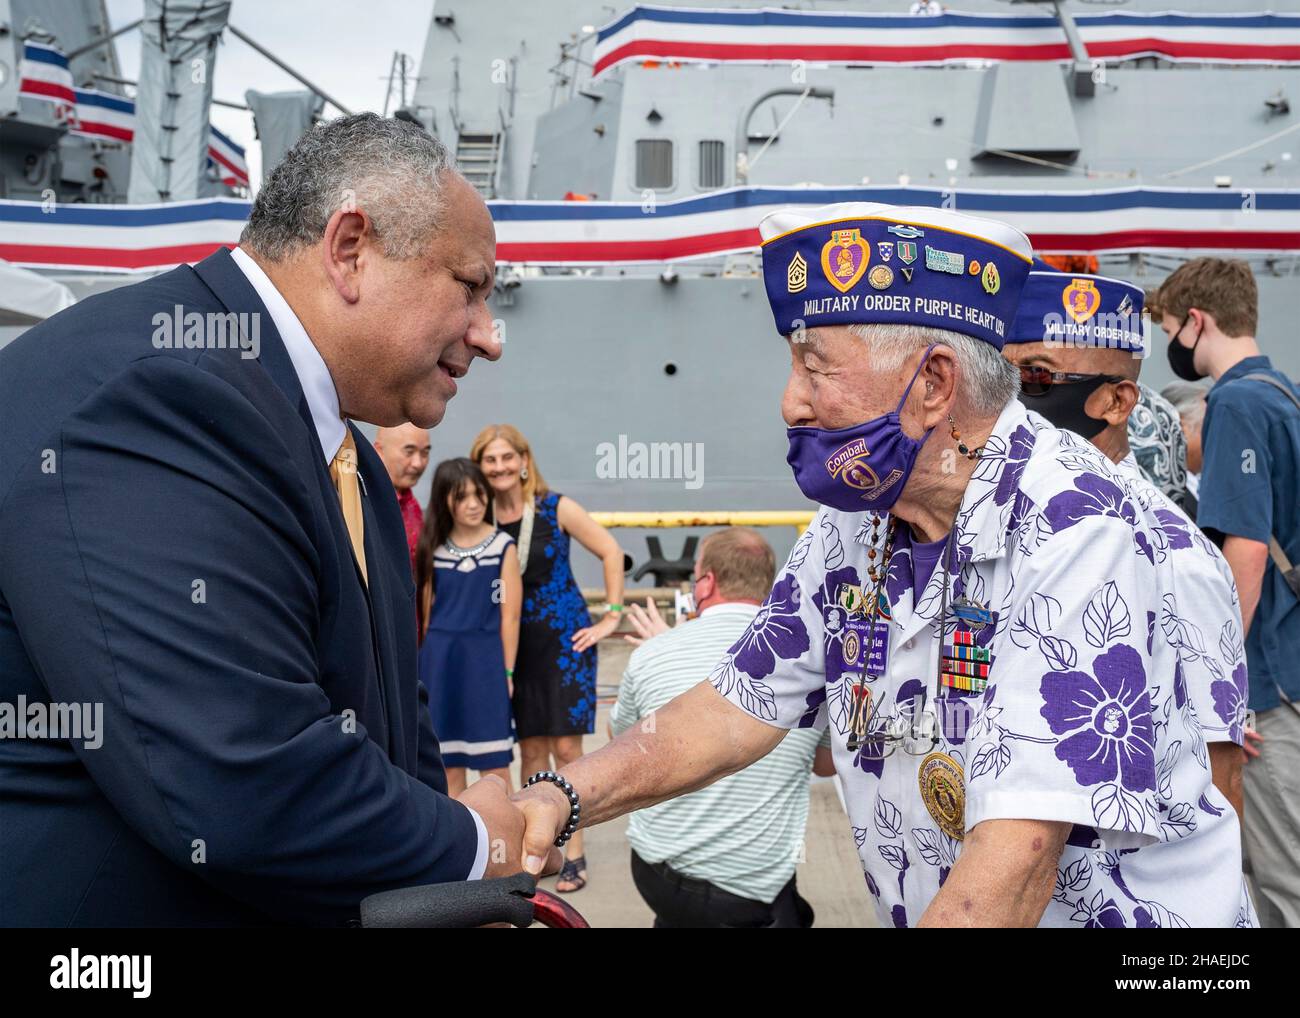 Pearl Harbor, United States. 08 December, 2021. U.S. Secretary of the Navy Carlos Del Toro, greets meets with Purple Heart recipients following the commissioning ceremony for the newest guided-missile destroyer, USS Daniel Inouye at Joint Base Pearl Harbor-Hickam, December 8, 2021 in Honolulu, Hawaii. The warship honors former U.S. Senator and Medal of Honor recipient Daniel Inouye. Credit: MC2 Logan Keown/U.S. Navy/Alamy Live News Stock Photo